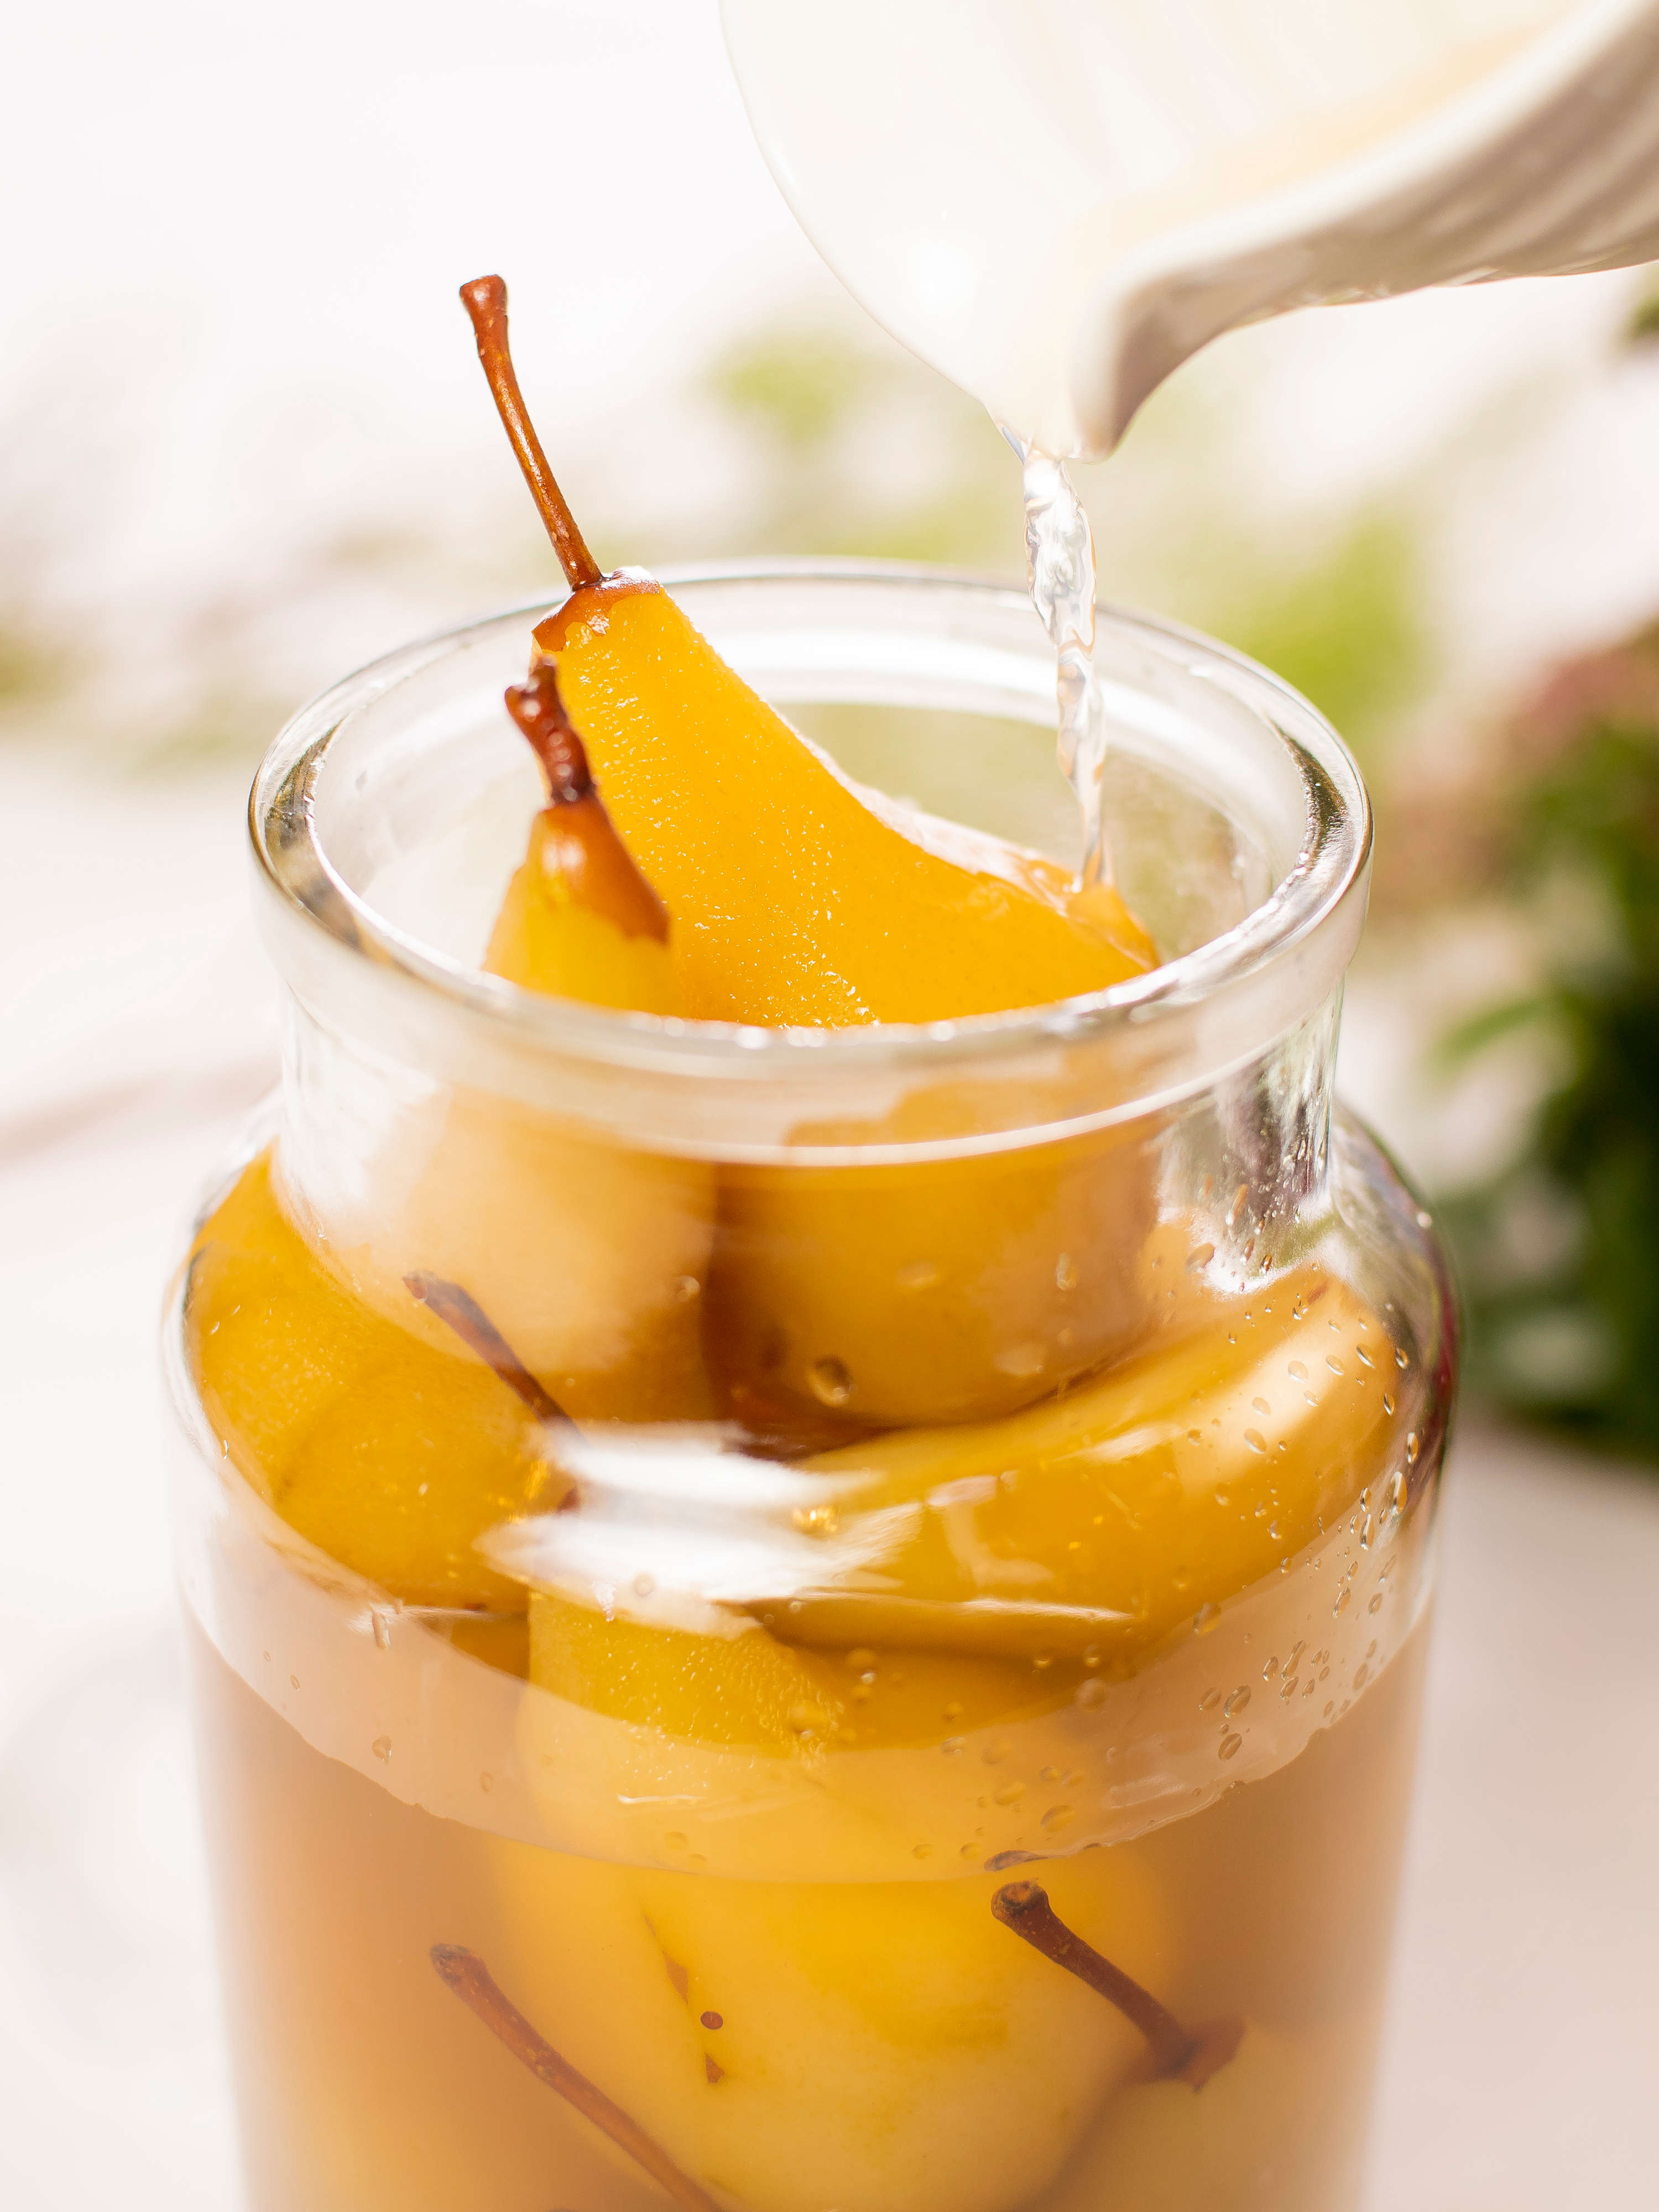 Clear glass jar filled with saffron poached pears with syrup being poured over them. Photo: Richard Jupe.